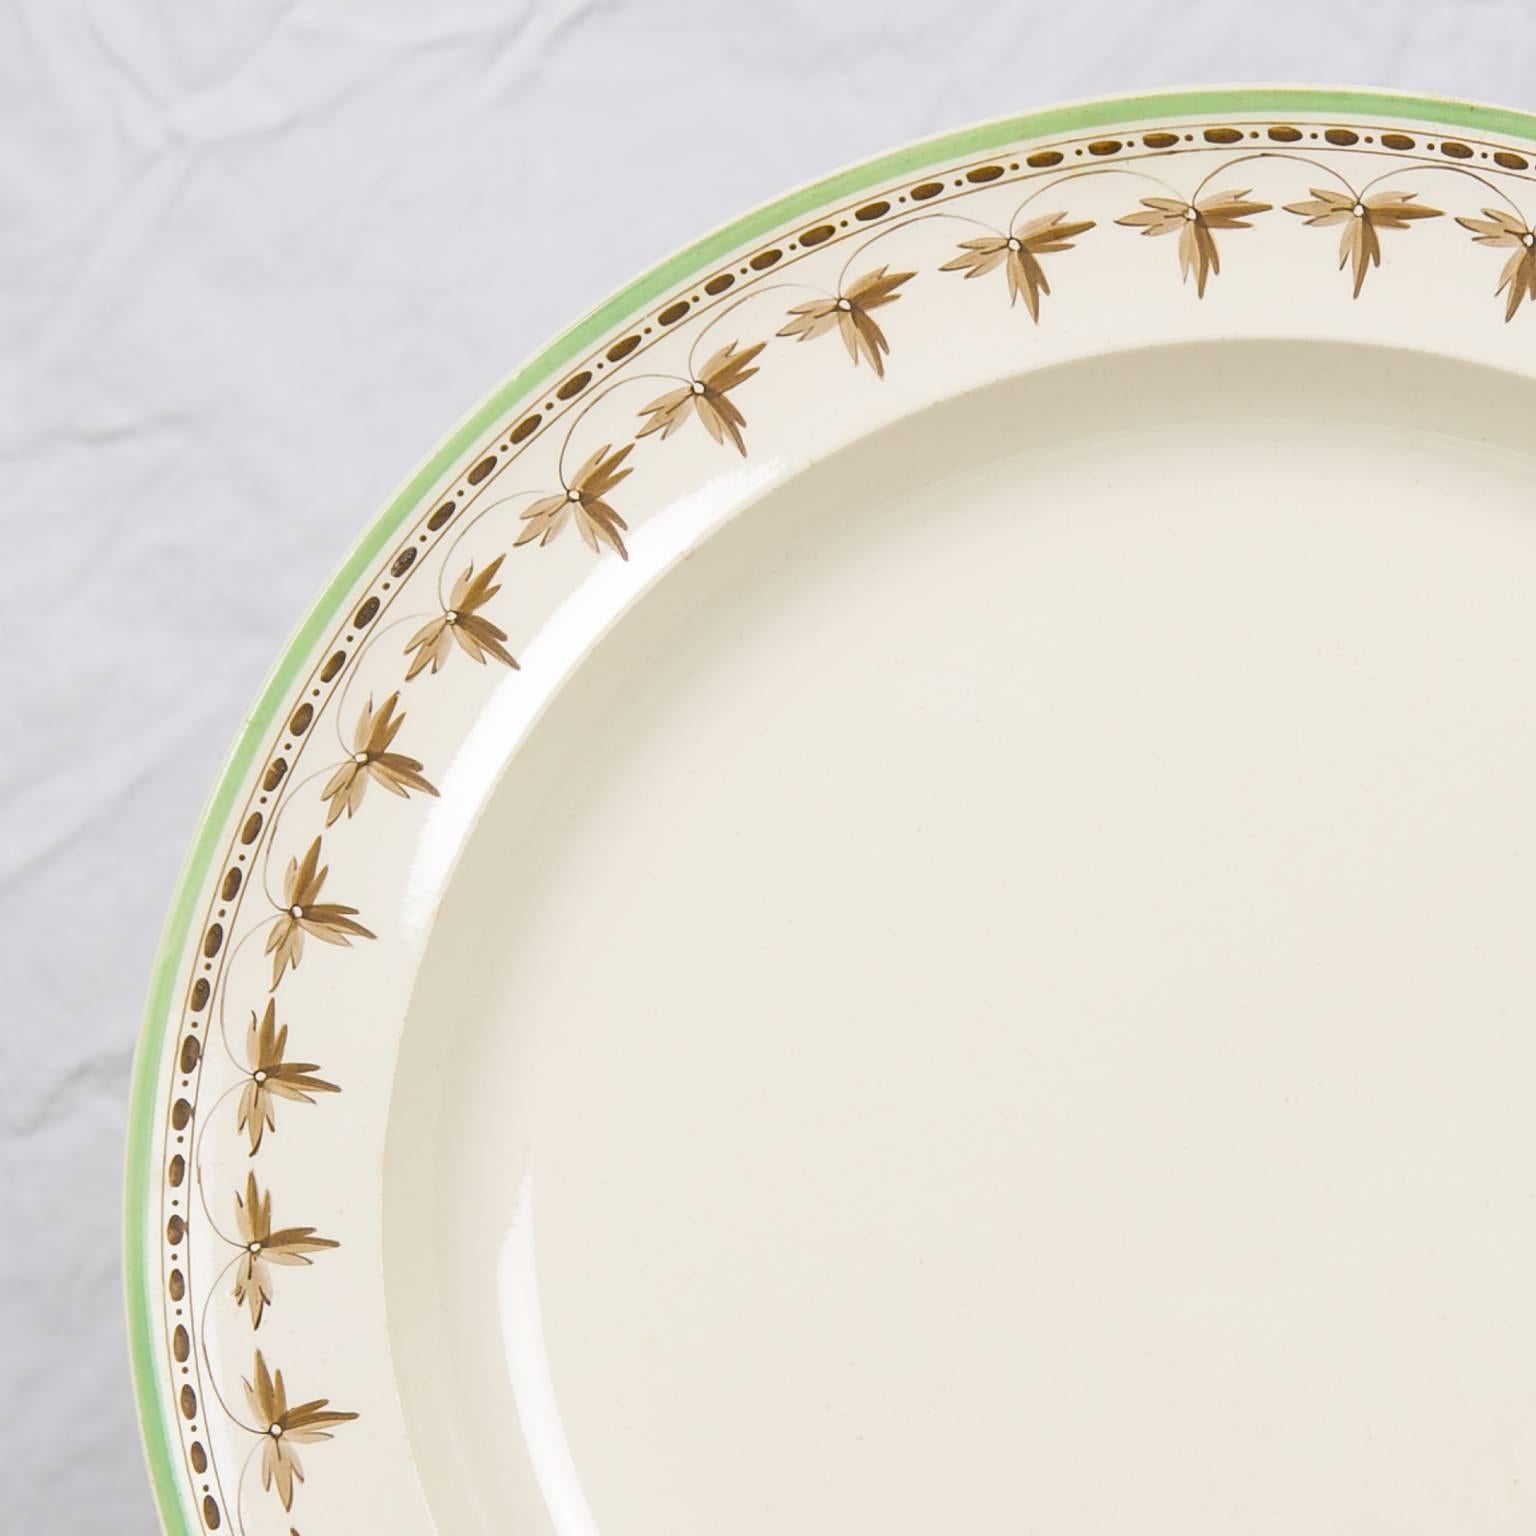 A set of 16, 18th century  creamware dishes the borders decorated with a beautiful brown necklace design, highlighted by a delicate green painted edge.
The dishes measure 9.75 inches diameter.
The condition is excellent.
The price for the 16 dishes